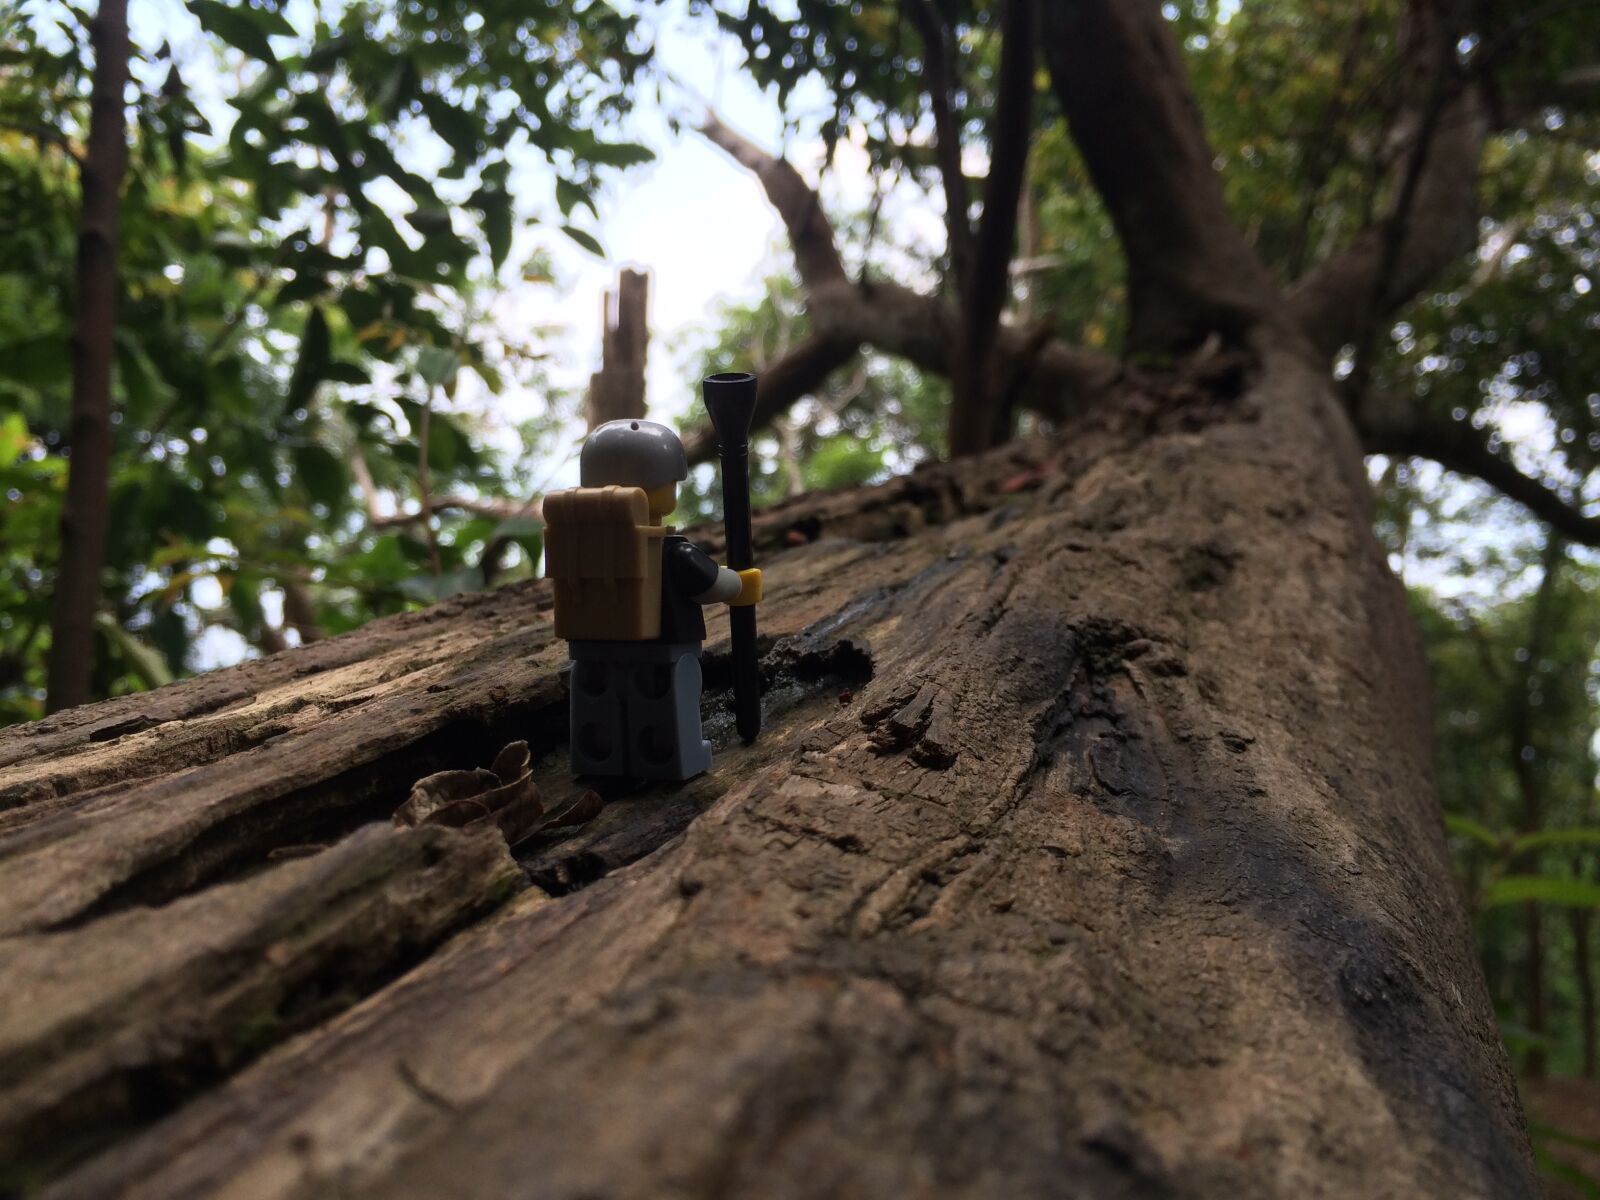 Apple iPhone 5s sample photo. Tree, lego, forest photography